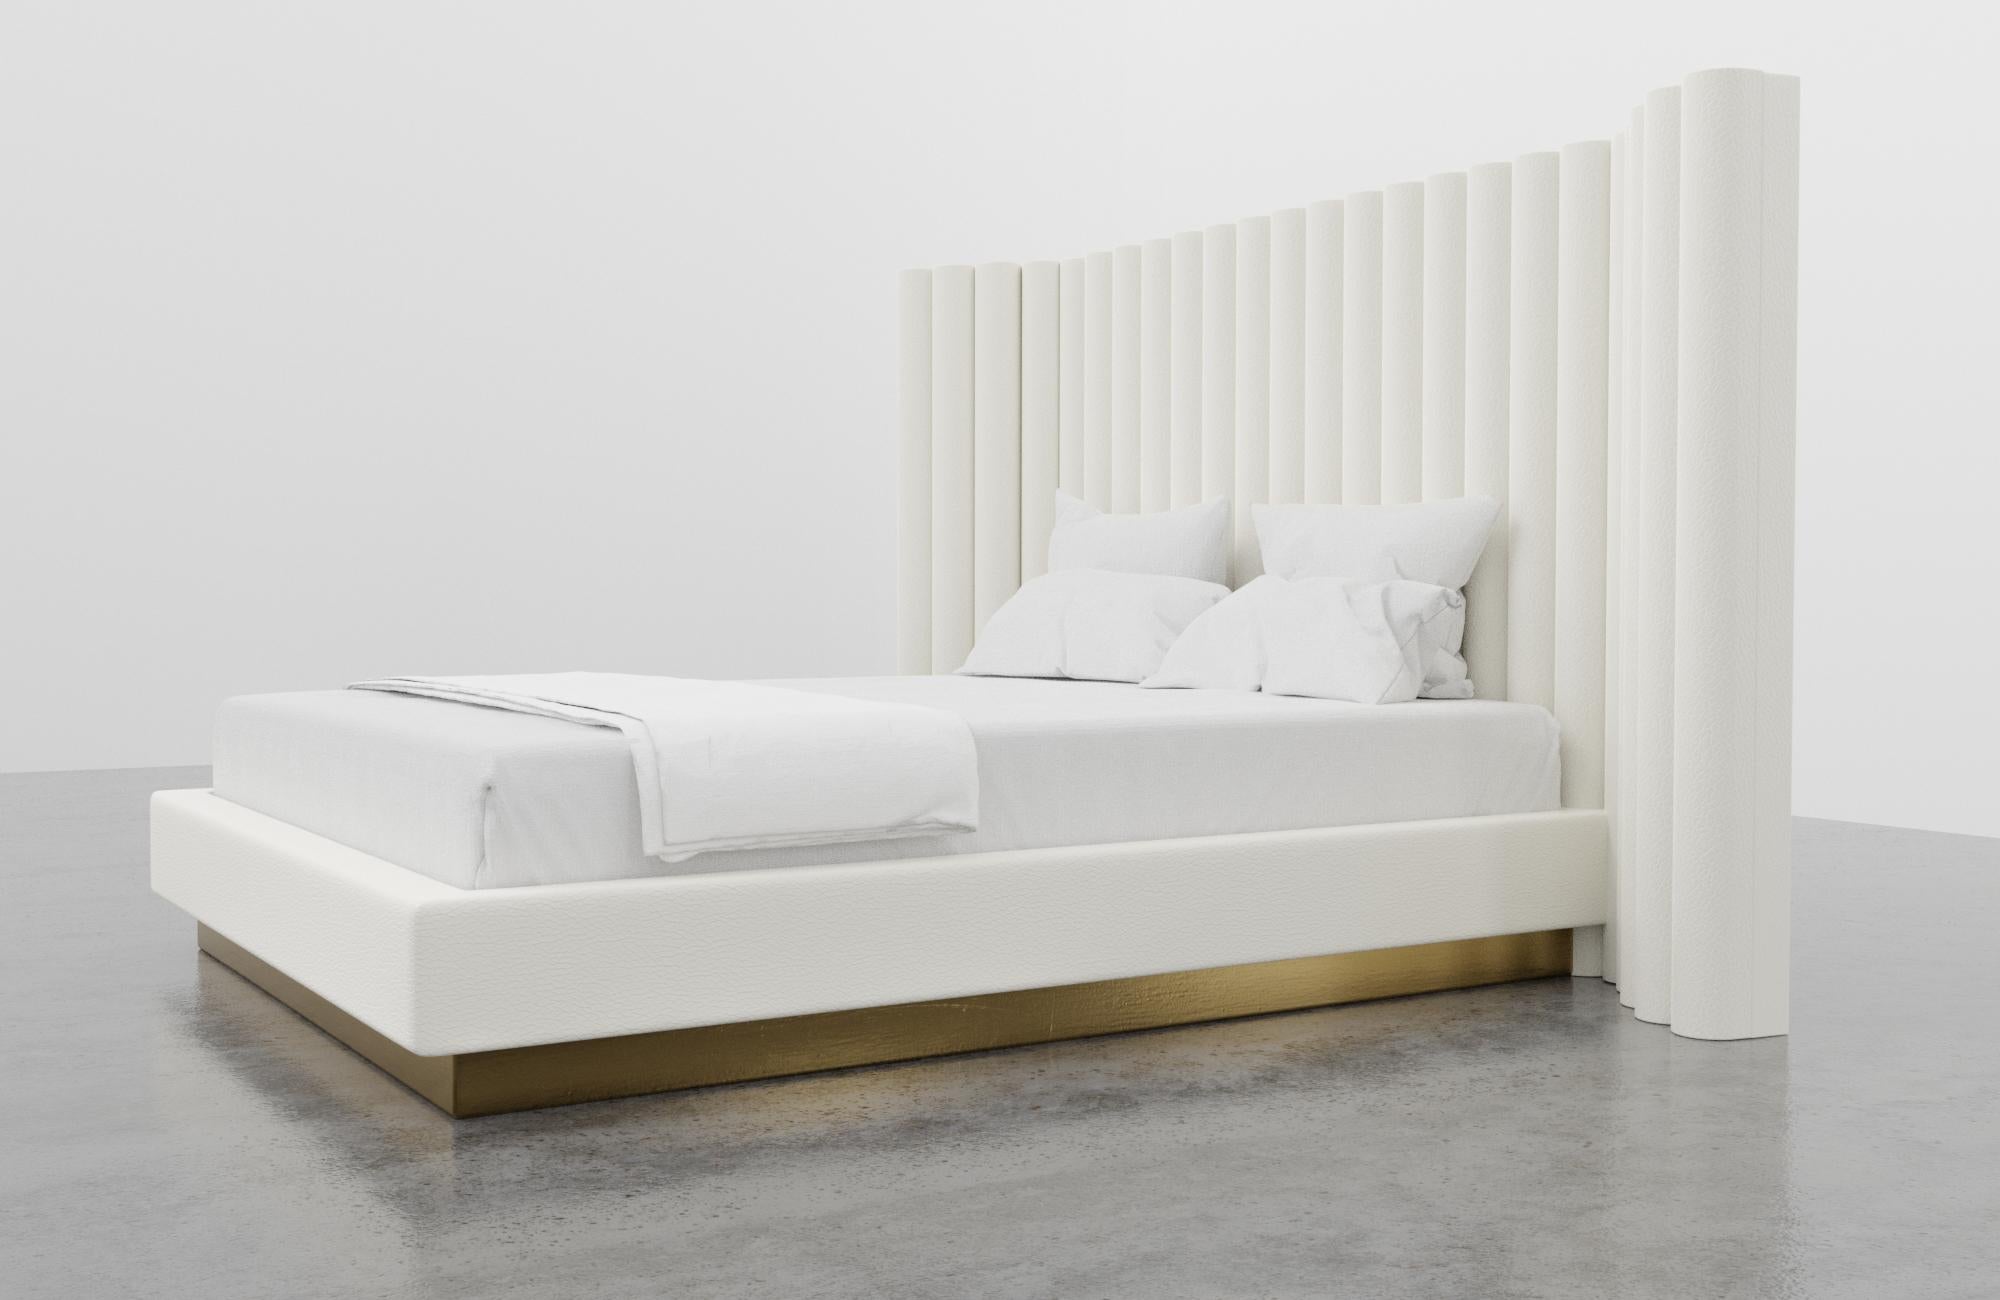 SACHA BED - Modern Bed in Faux White Leather and Polished Bronze Base

The Sacha Bed is a modern and stylish piece of furniture that features a sexy, vertically channeled headboard and a fully upholstered platform system. The headboard height can